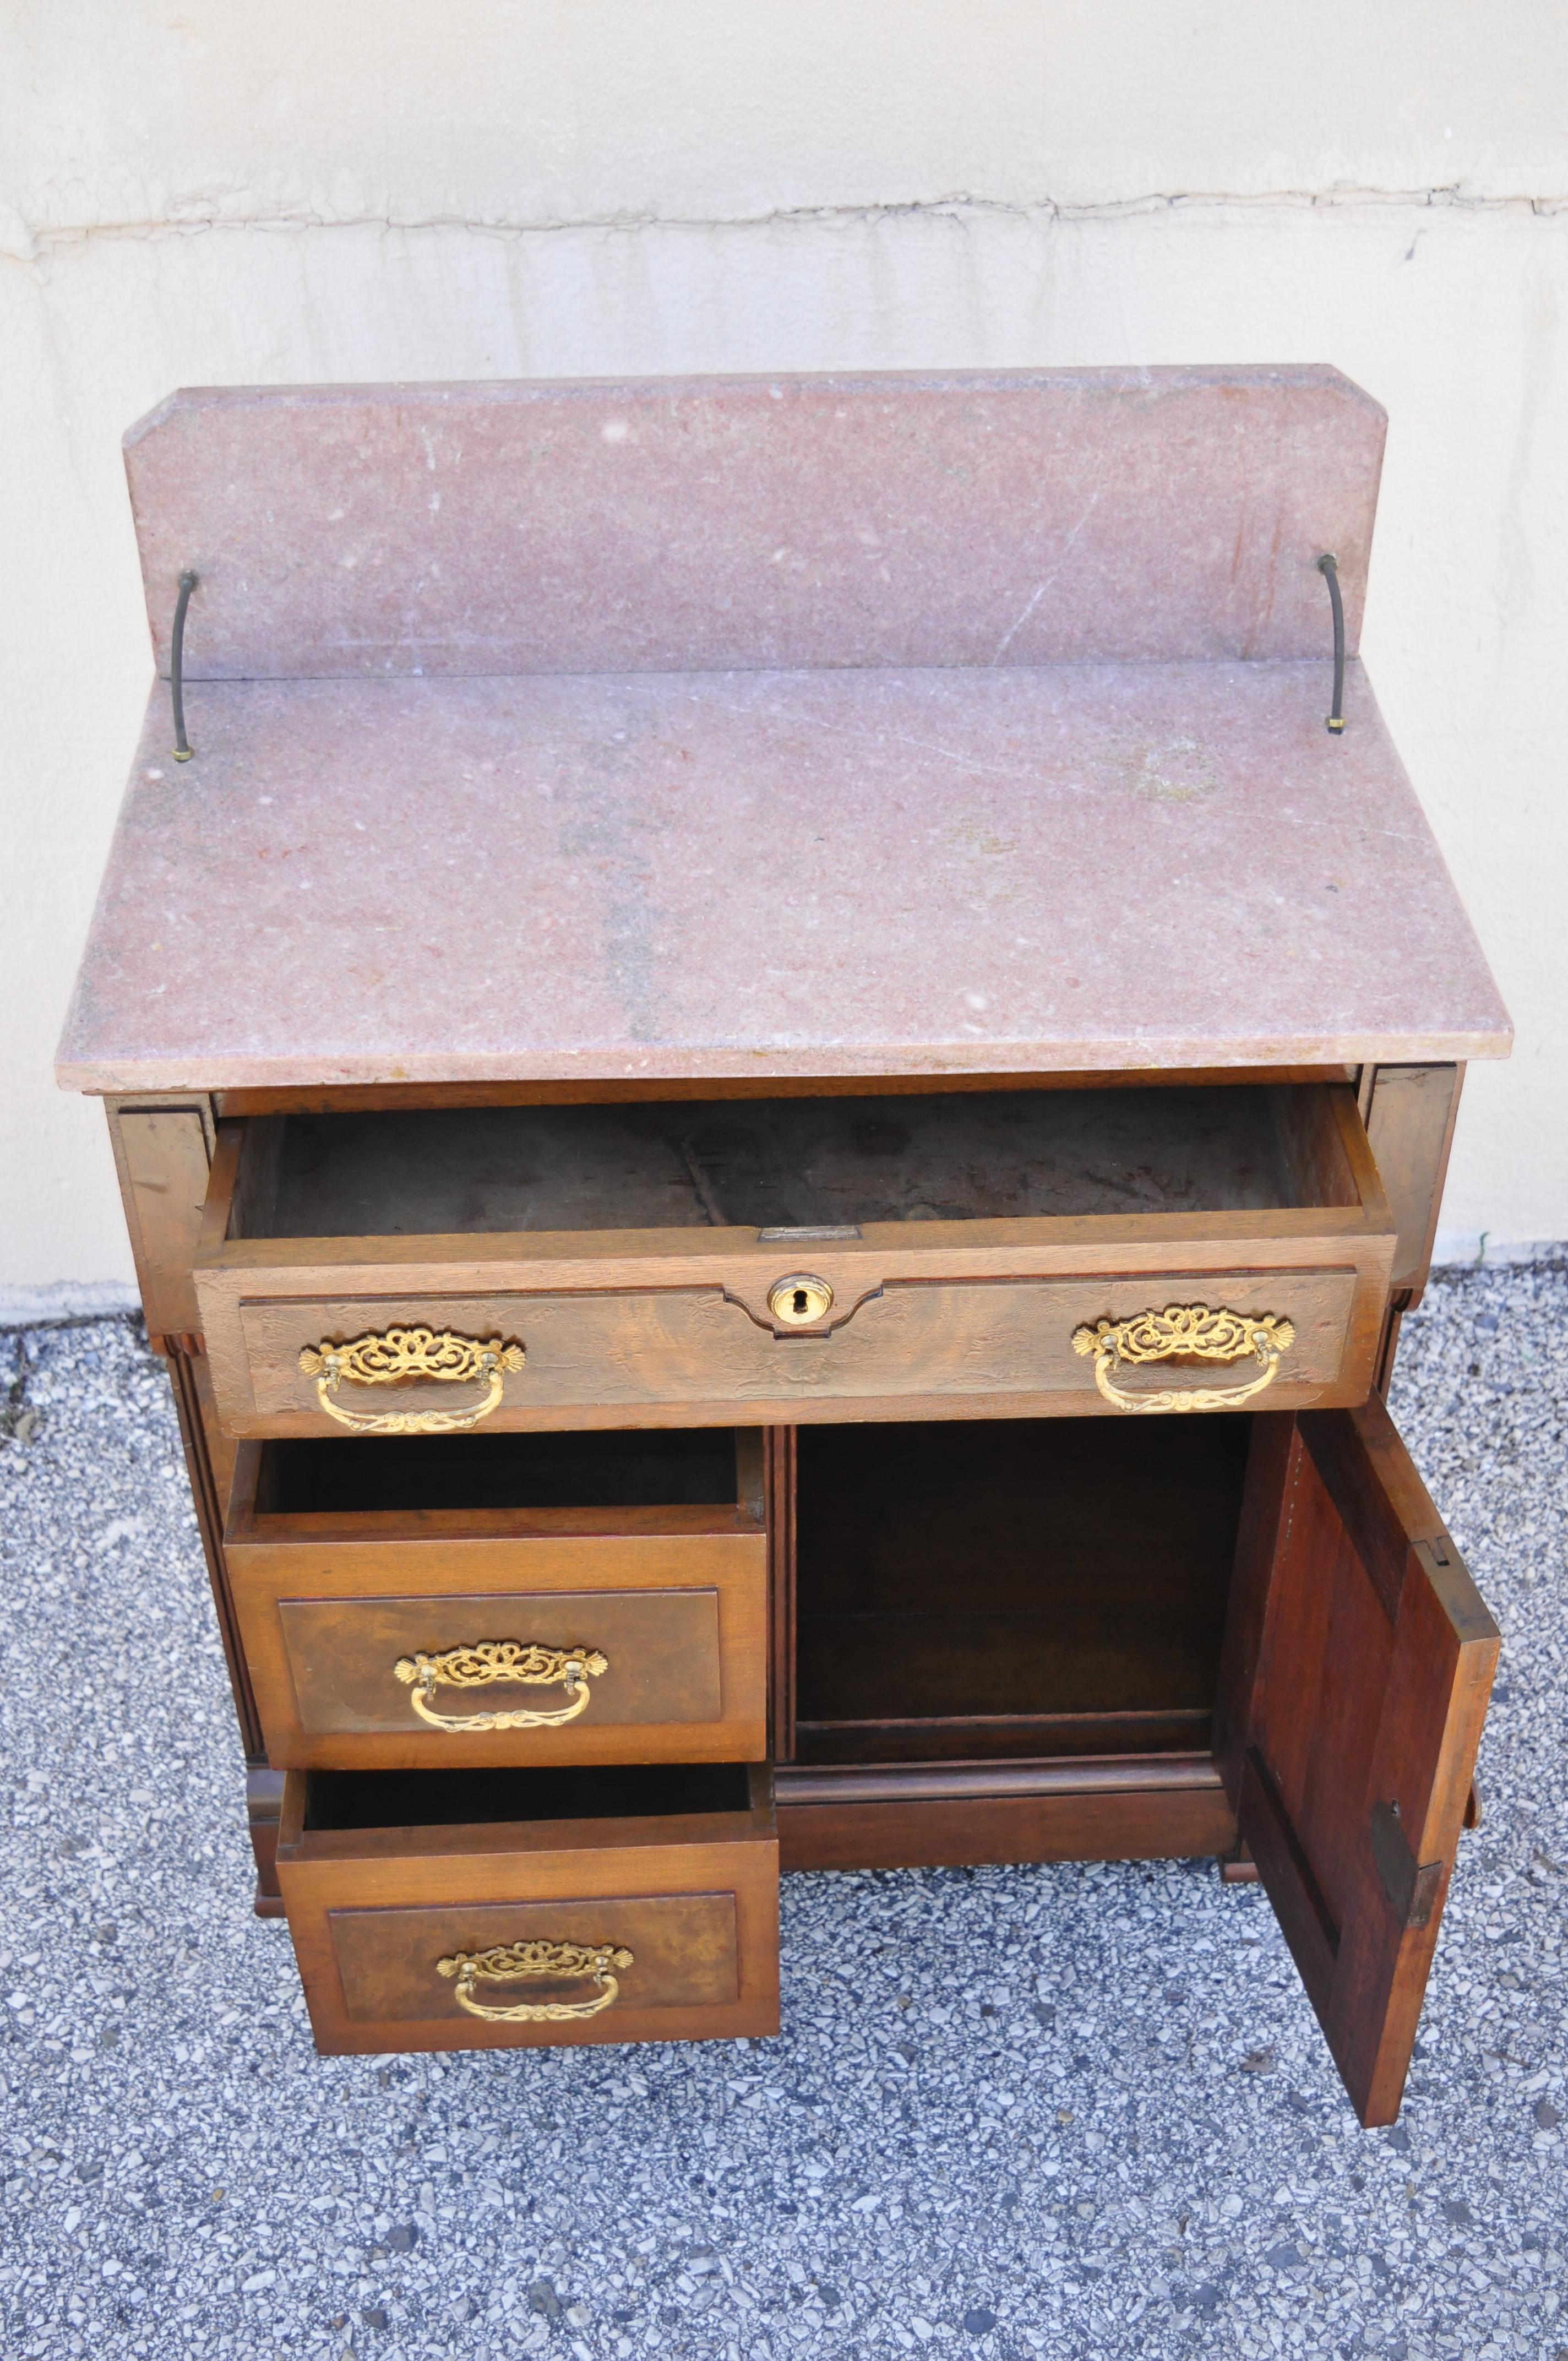 19th Century Antique Eastlake Victorian Walnut Washstand Commode with Marble Top Backsplash For Sale